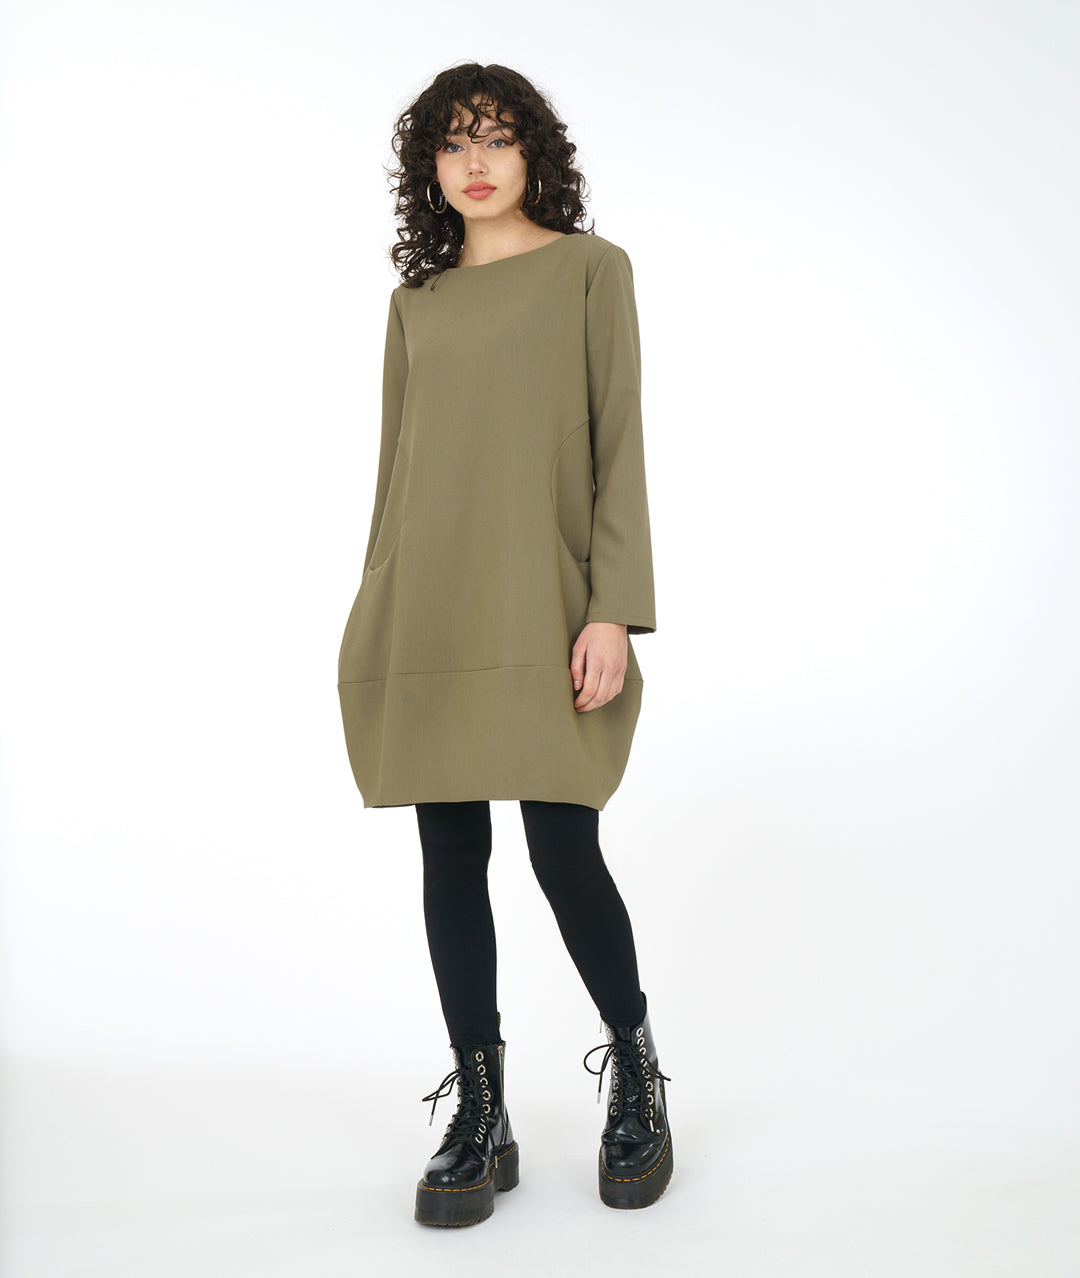 model in a sage green dress with long sleeves, a wide bottom hem, soft round neckline and curved side seams with a set in pocket on either side, worn with black leggings and boots